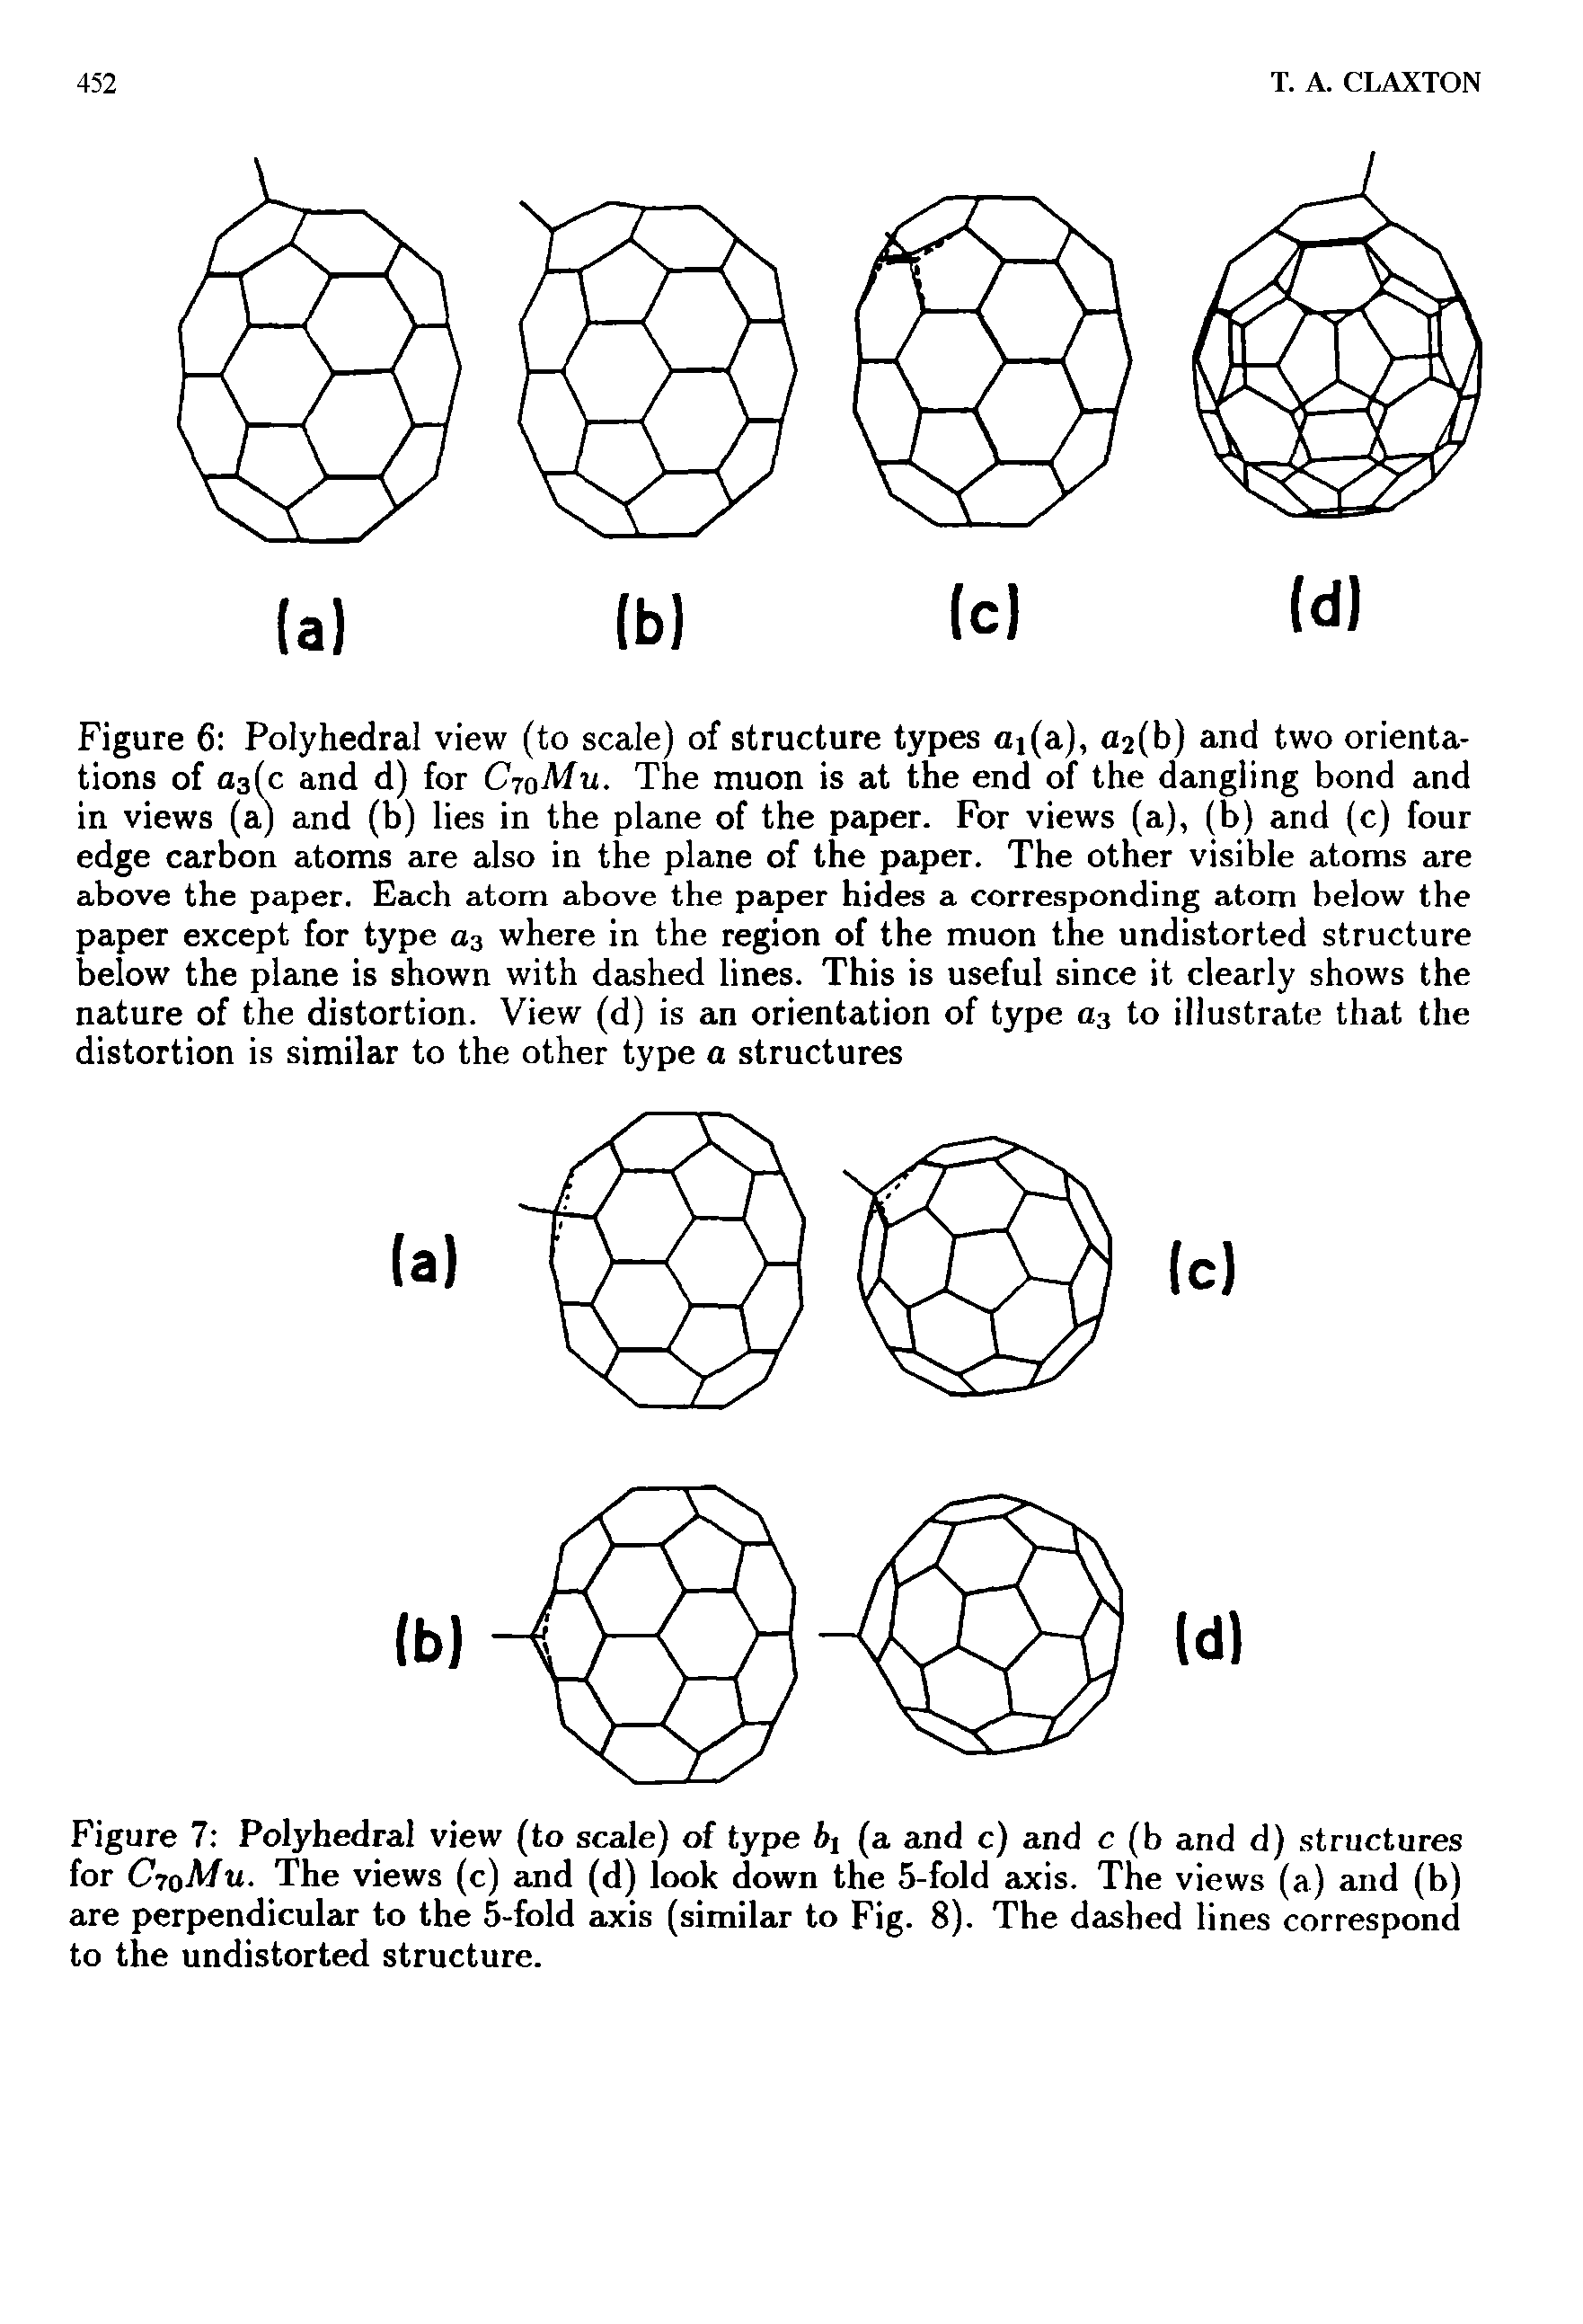 Figure 6 Polyhedral view (to scale) of structure types ai(a), a2(b) and two orientations of 03(0 and d) for CtqMu. The muon is at the end of the dangling bond and in views (a) and (b) lies in the plane of the paper. For views (a), (b) and (c) four edge carbon atoms are also in the plane of the paper. The other visible atoms are above the paper. Each atom above the paper hides a corresponding atom below the paper except for type 03 where in the region of the muon the undistorted structure below the plane is shown with dashed lines. This is useful since it clearly shows the nature of the distortion. View (d) is an orientation of type 03 to illustrate that the distortion is similar to the other type a structures...